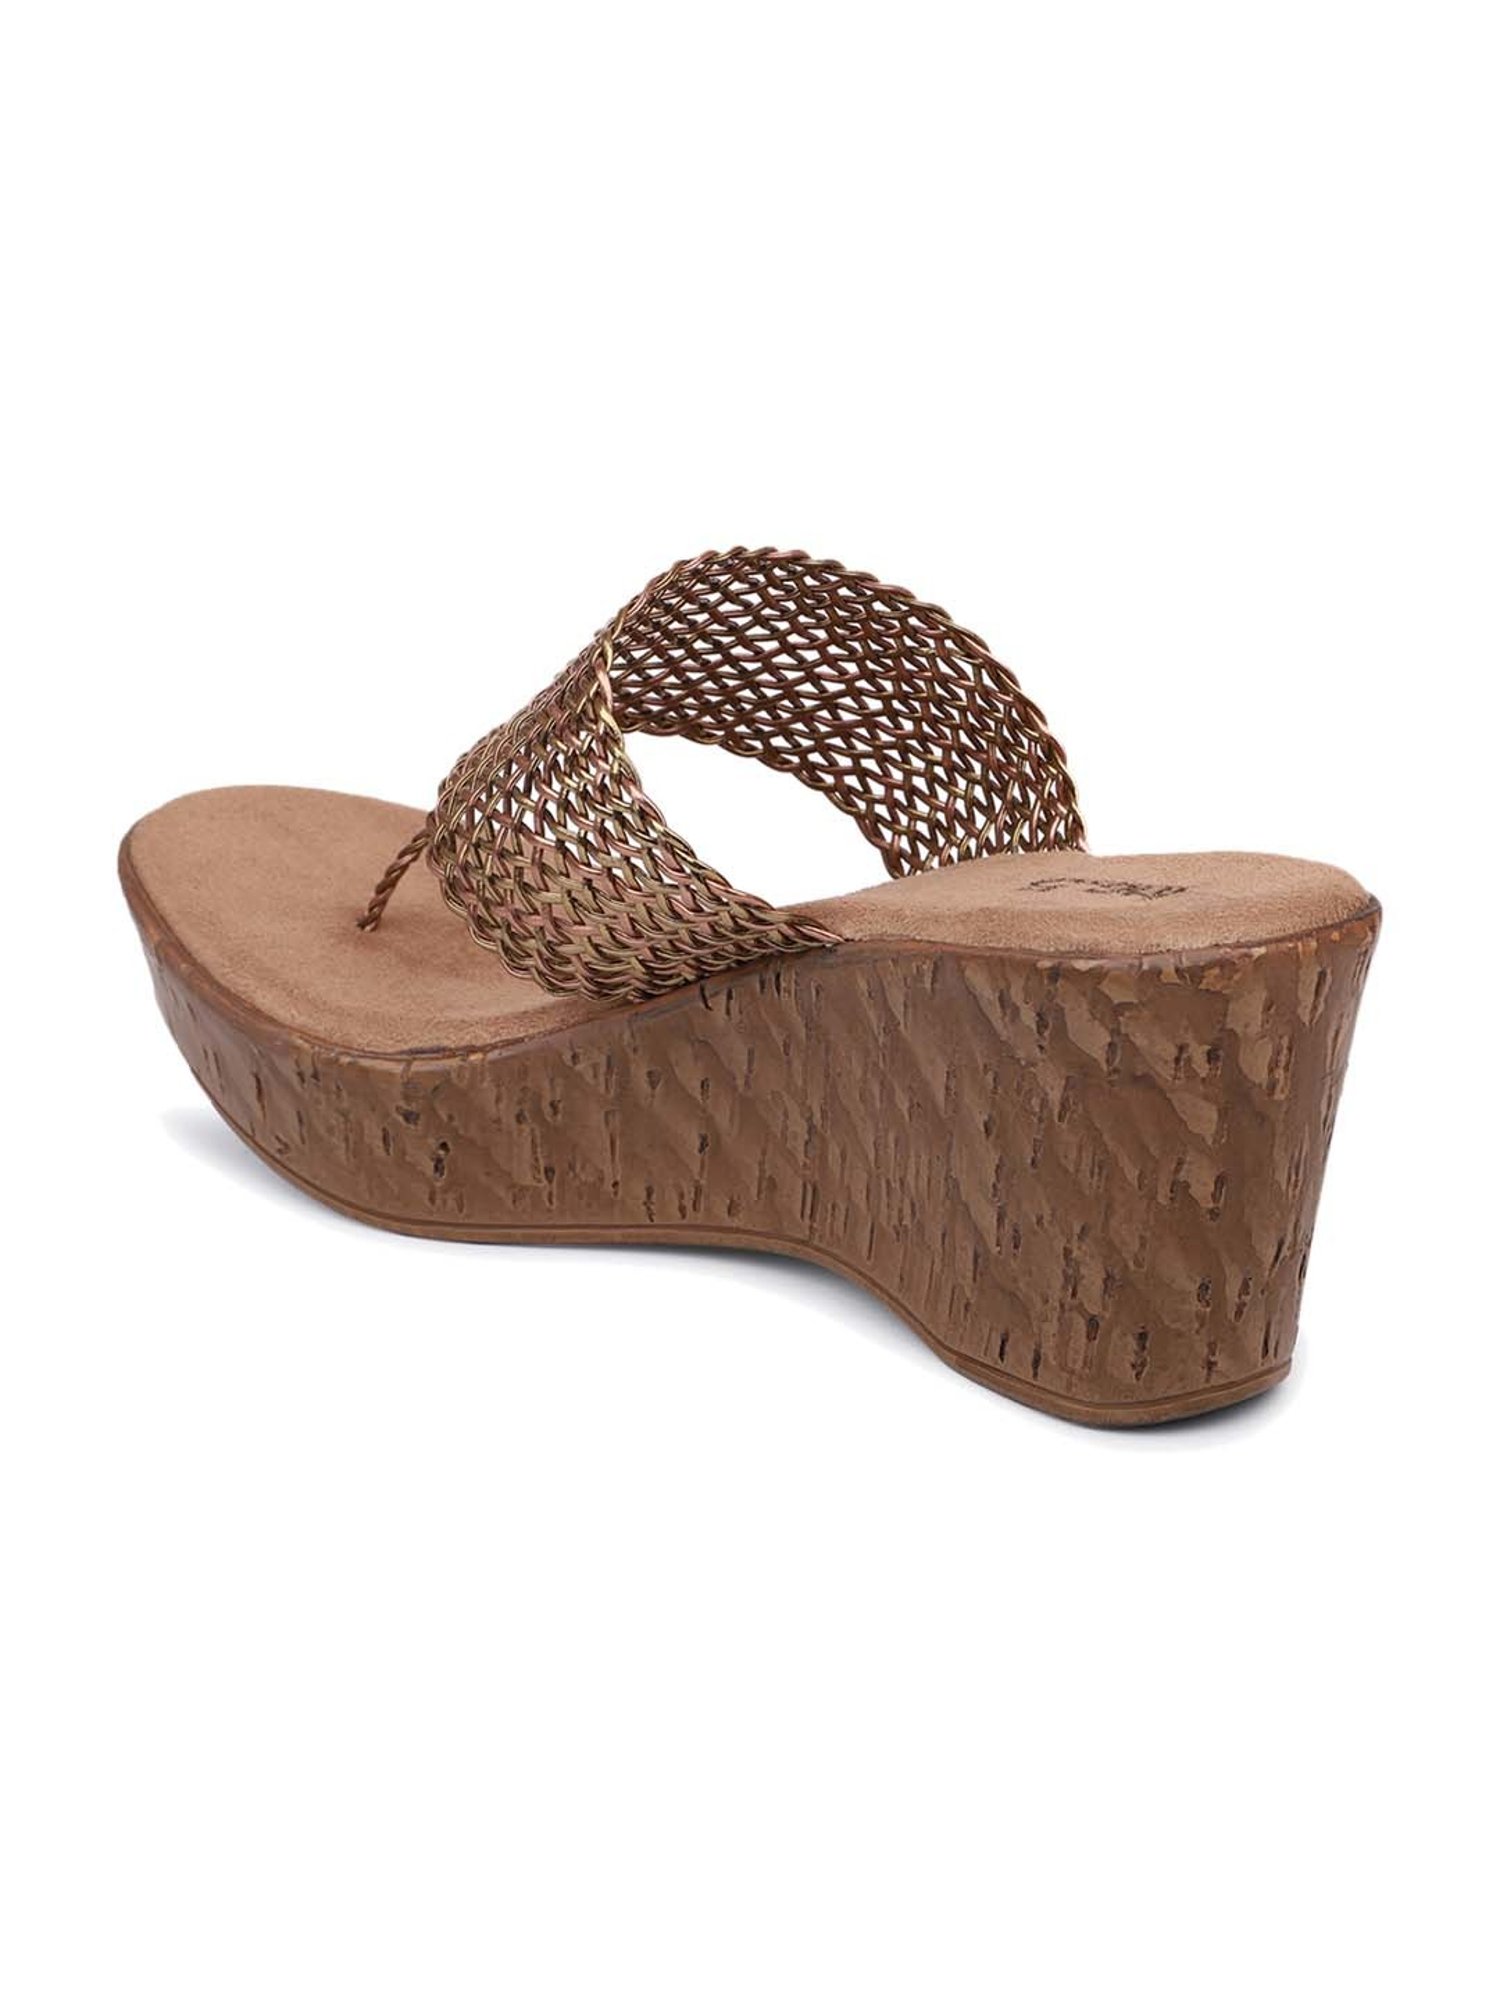 Buy Green Flat Sandals for Women by Inc.5 Online | Ajio.com